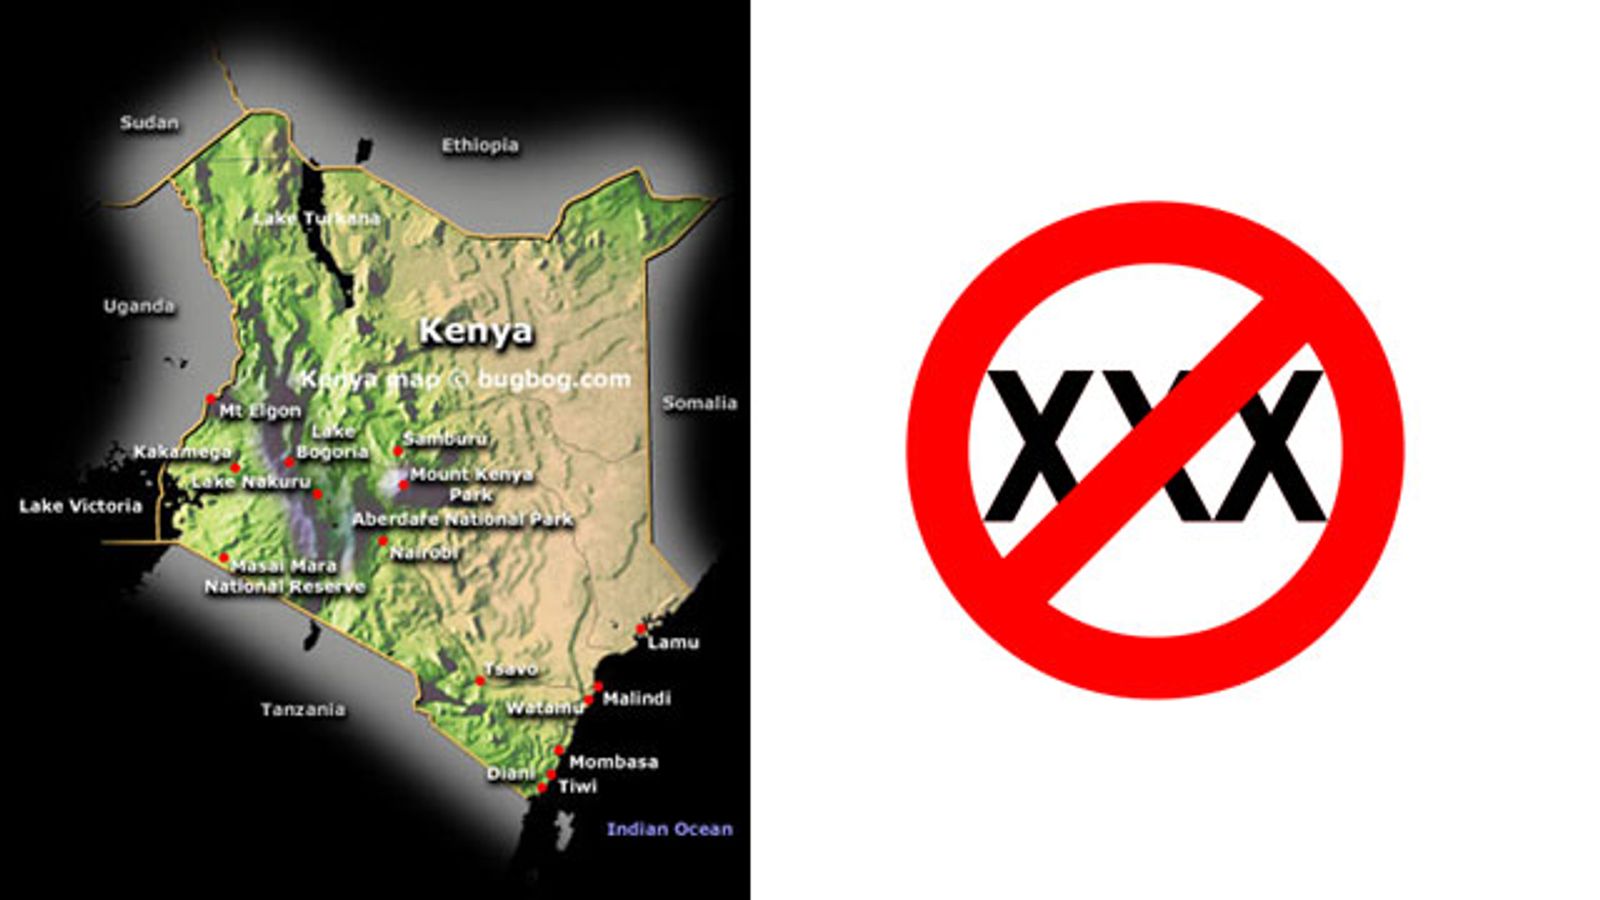 Kenya to Block .XXX, Says Government Official